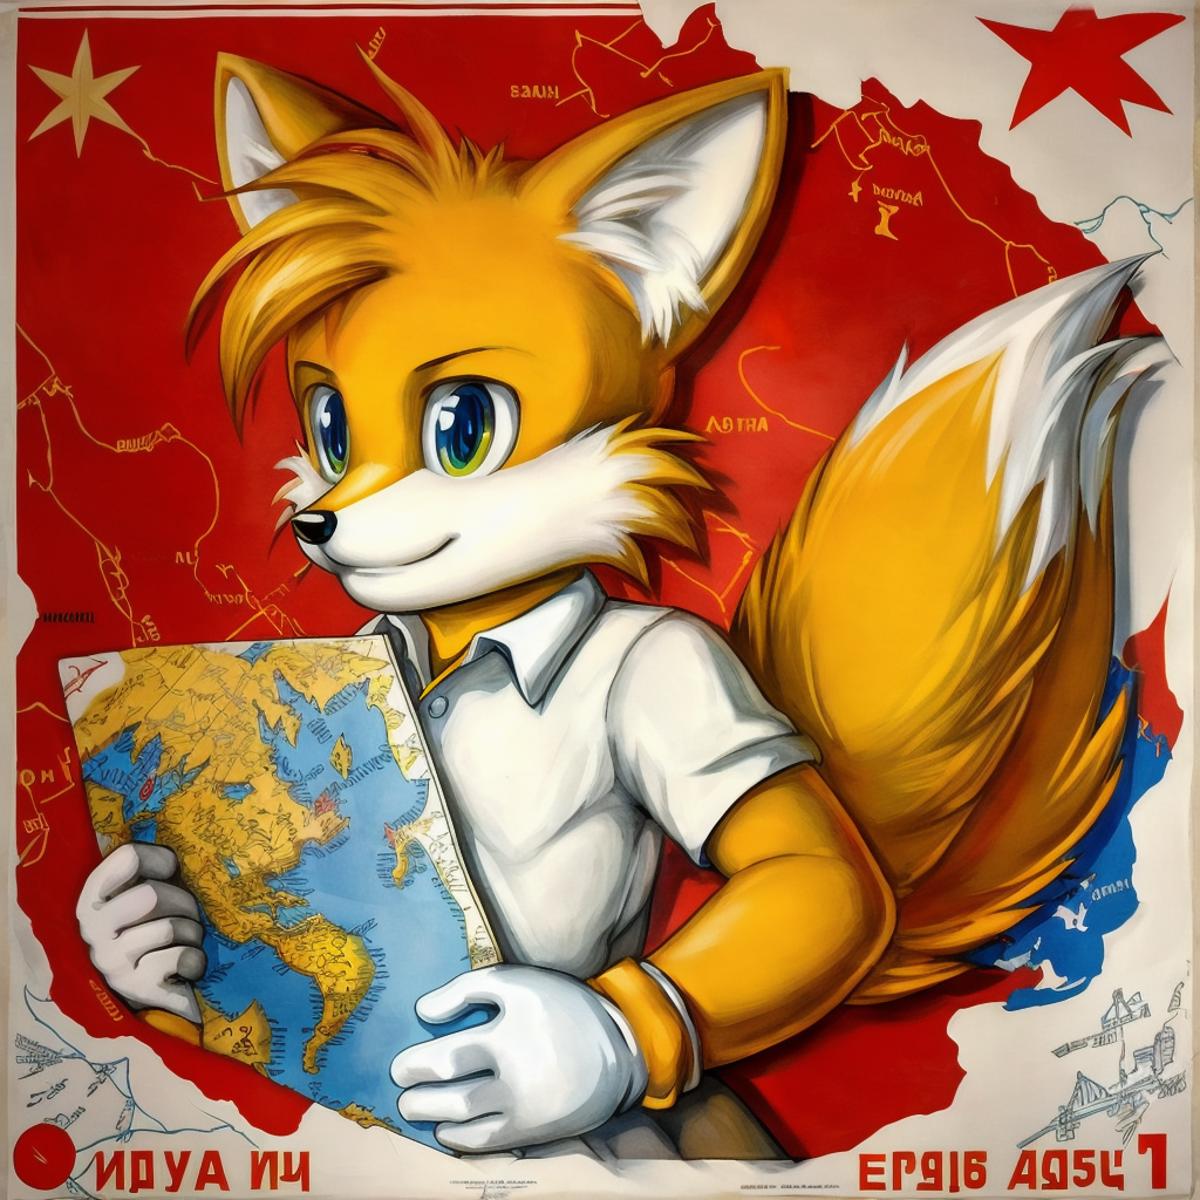 USSR POSTER image by westhelicopter2312